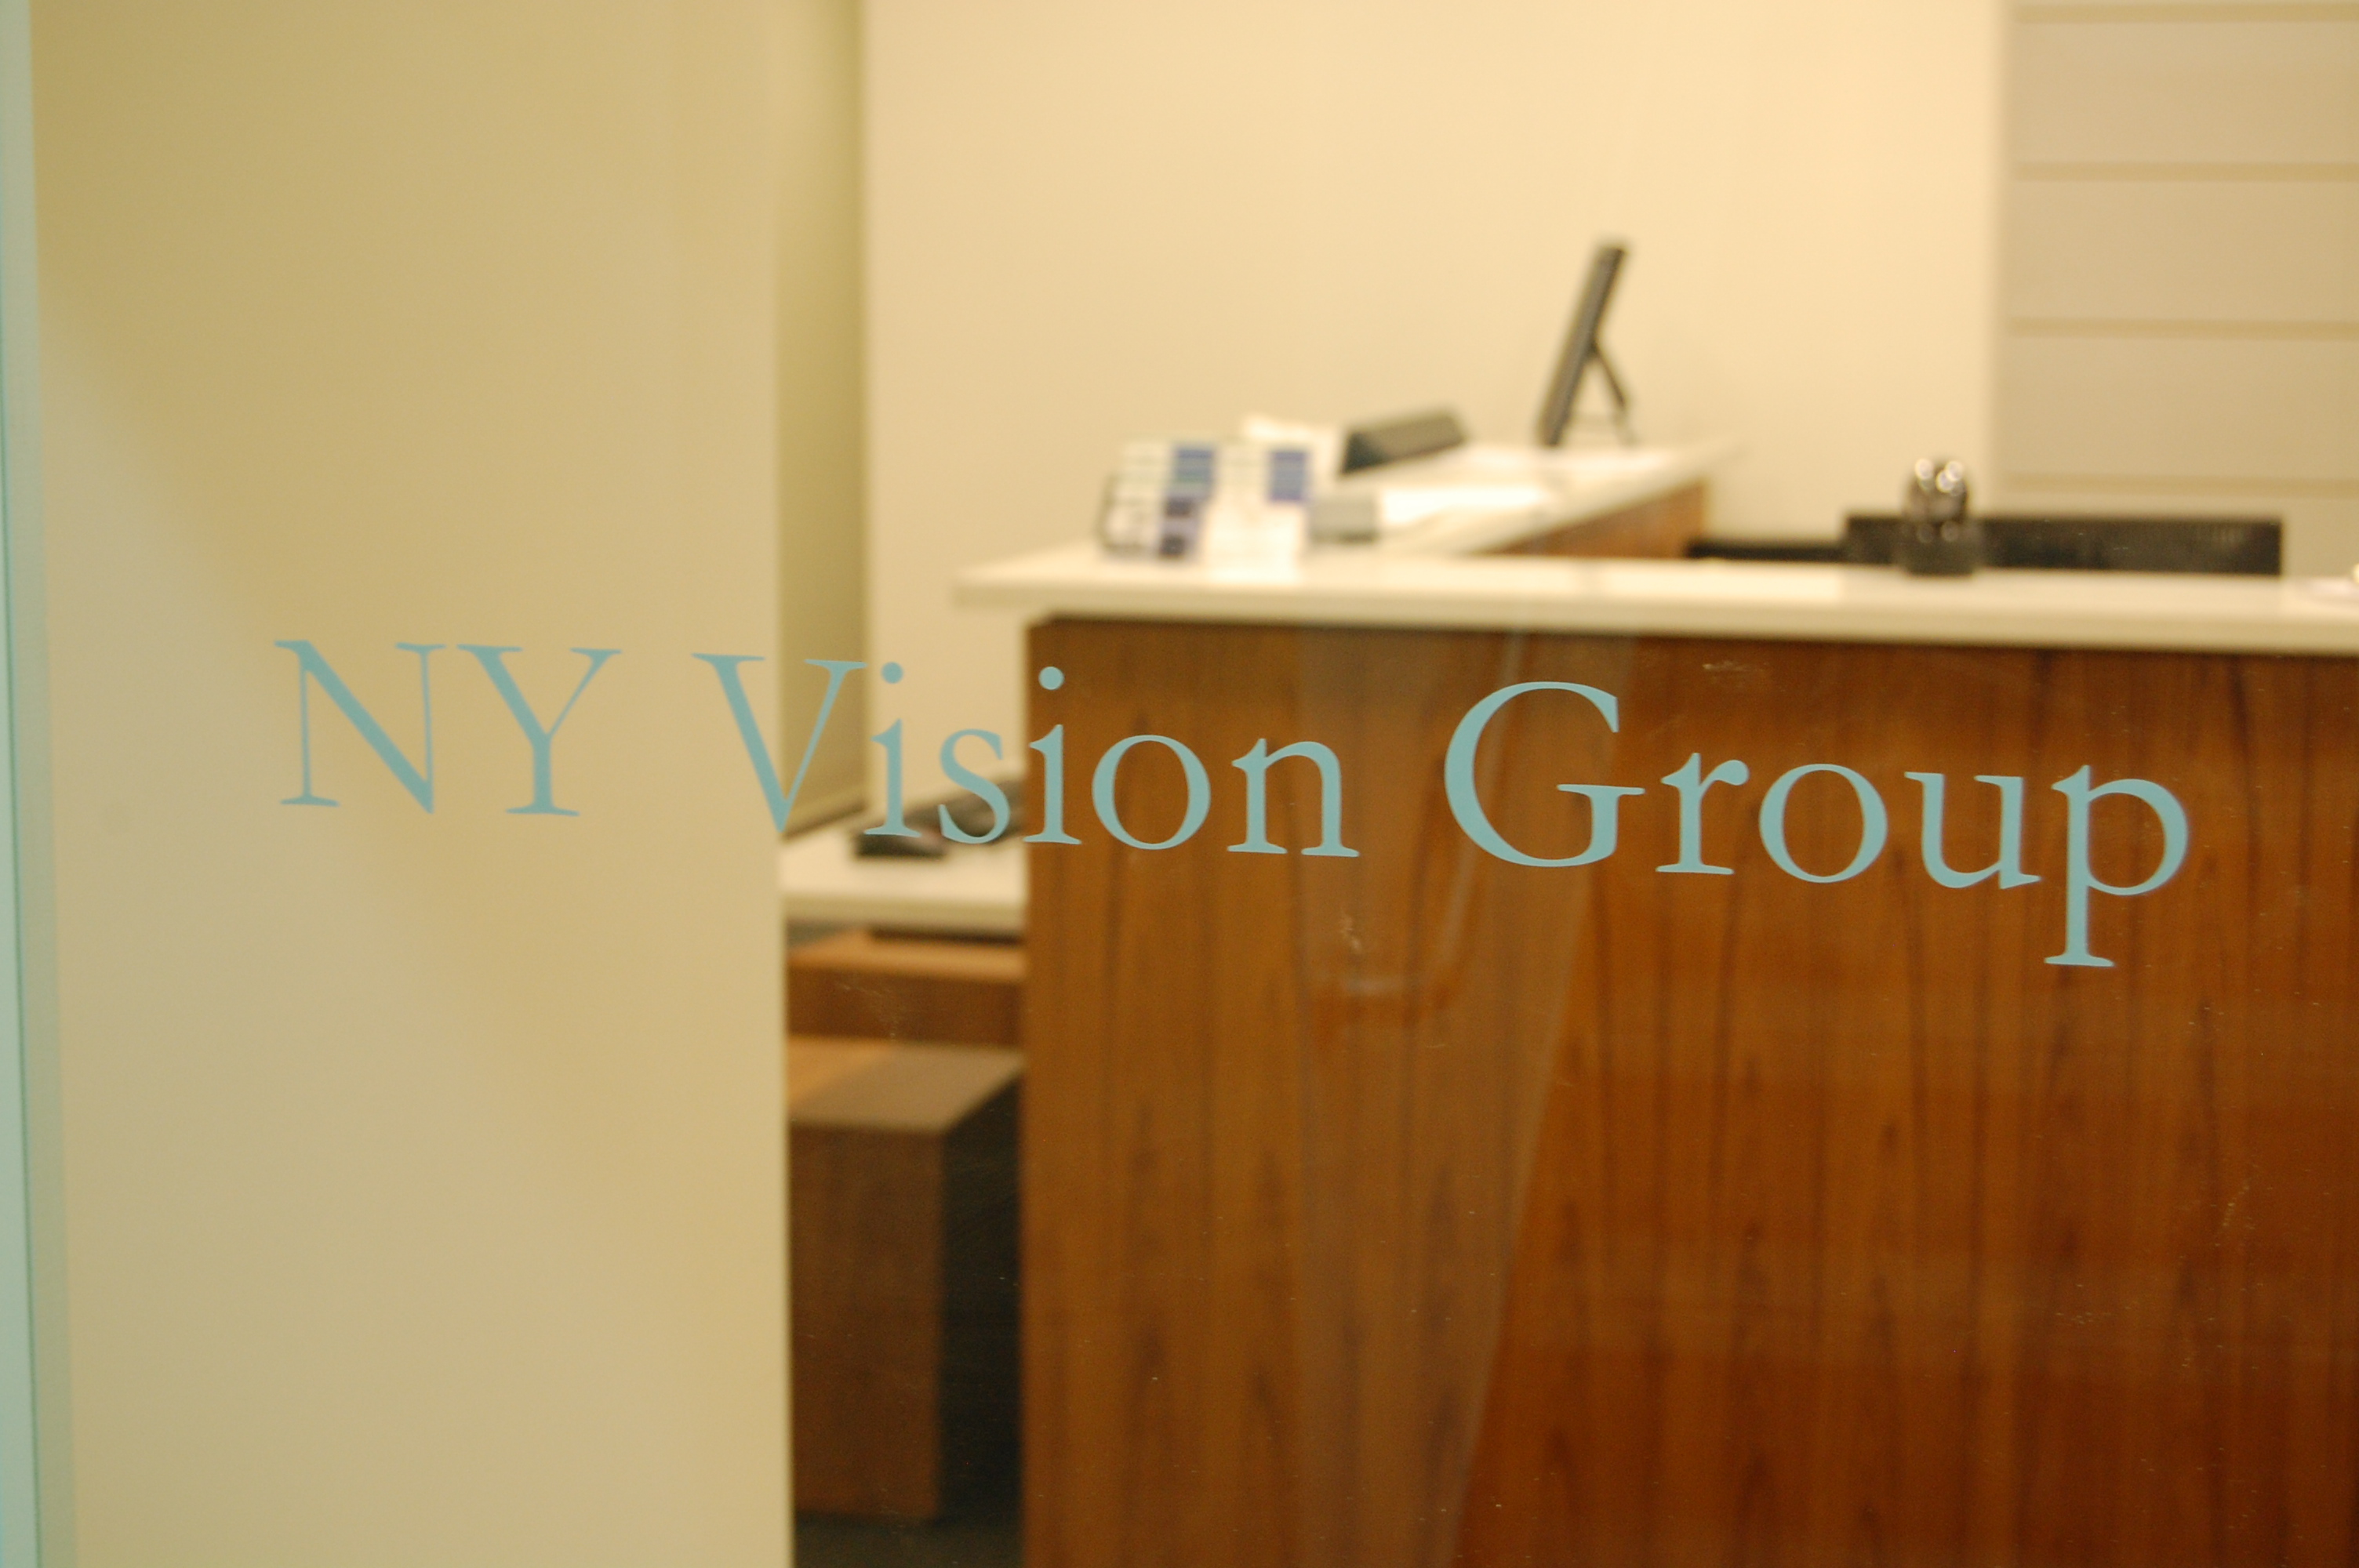 NY Vision Group - Dr. Harry R. Koster, MD Photo